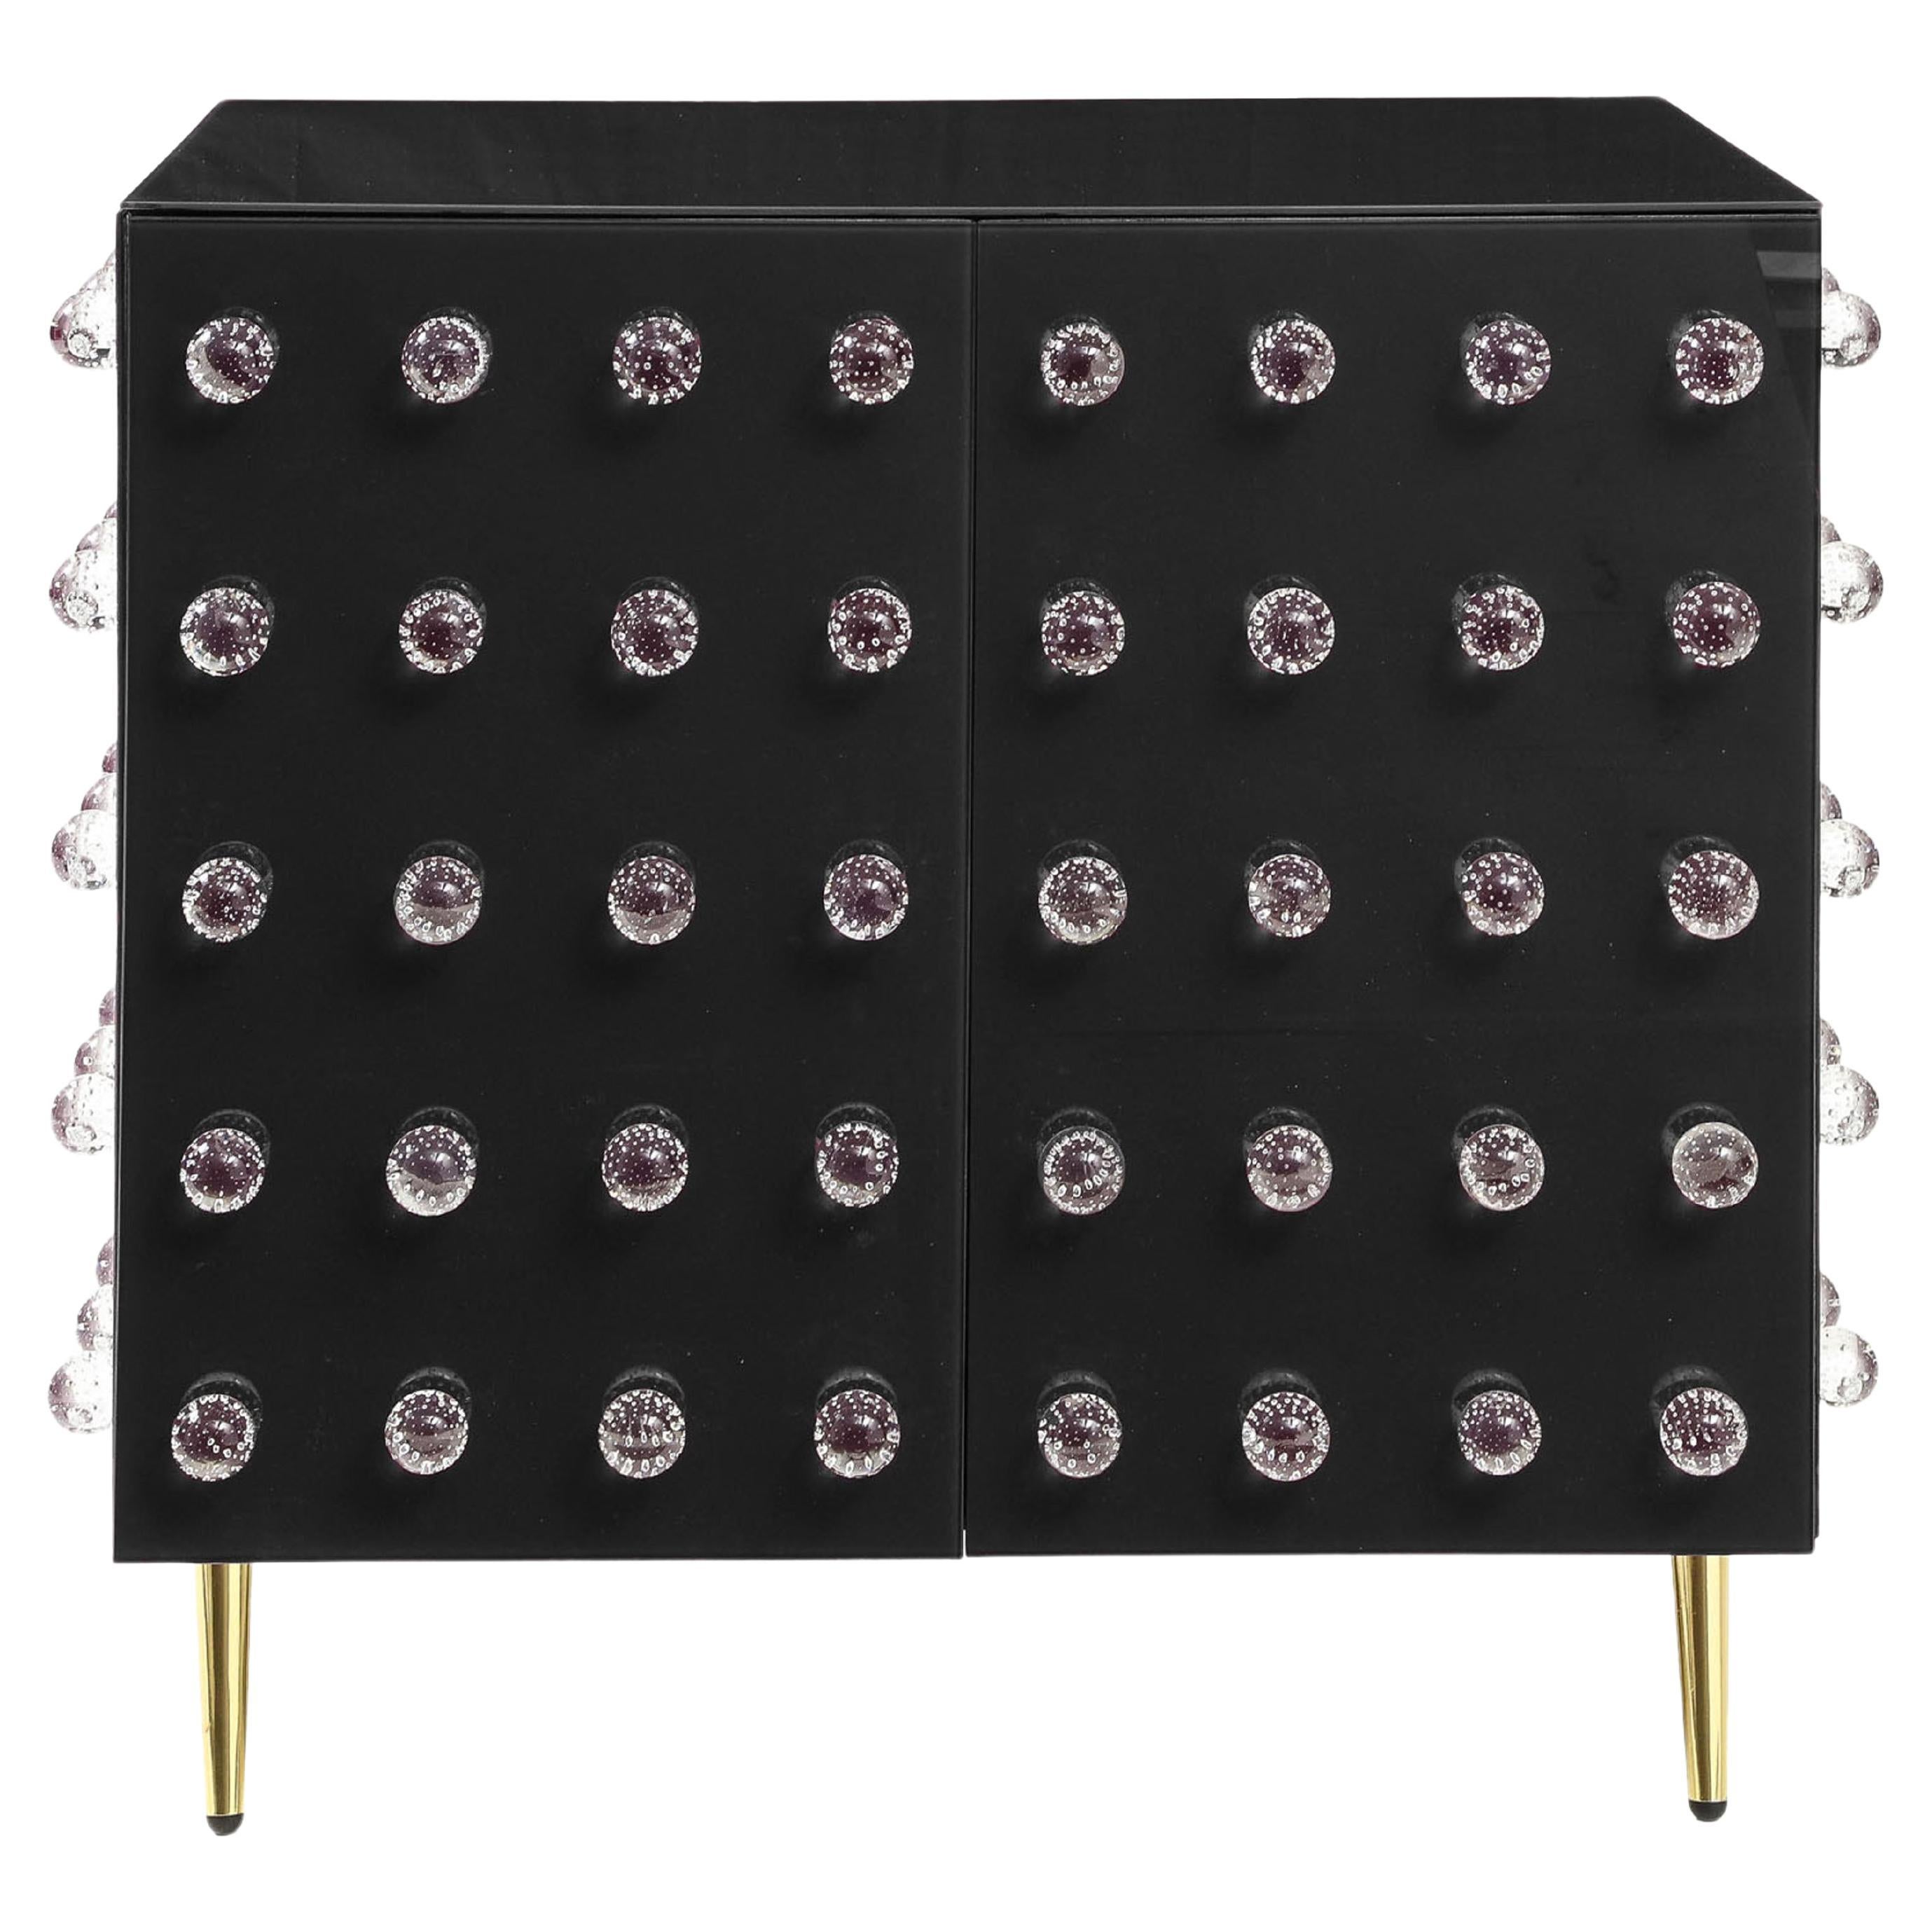 This sublime cabinet is a true work of art, handcrafted by expert Murano glassmakers blending ancient and modern styles. 

This cabinet features 90 exquisite Murano glass spheres decorating a rich black glass surface. 

Opulent brass feet complete